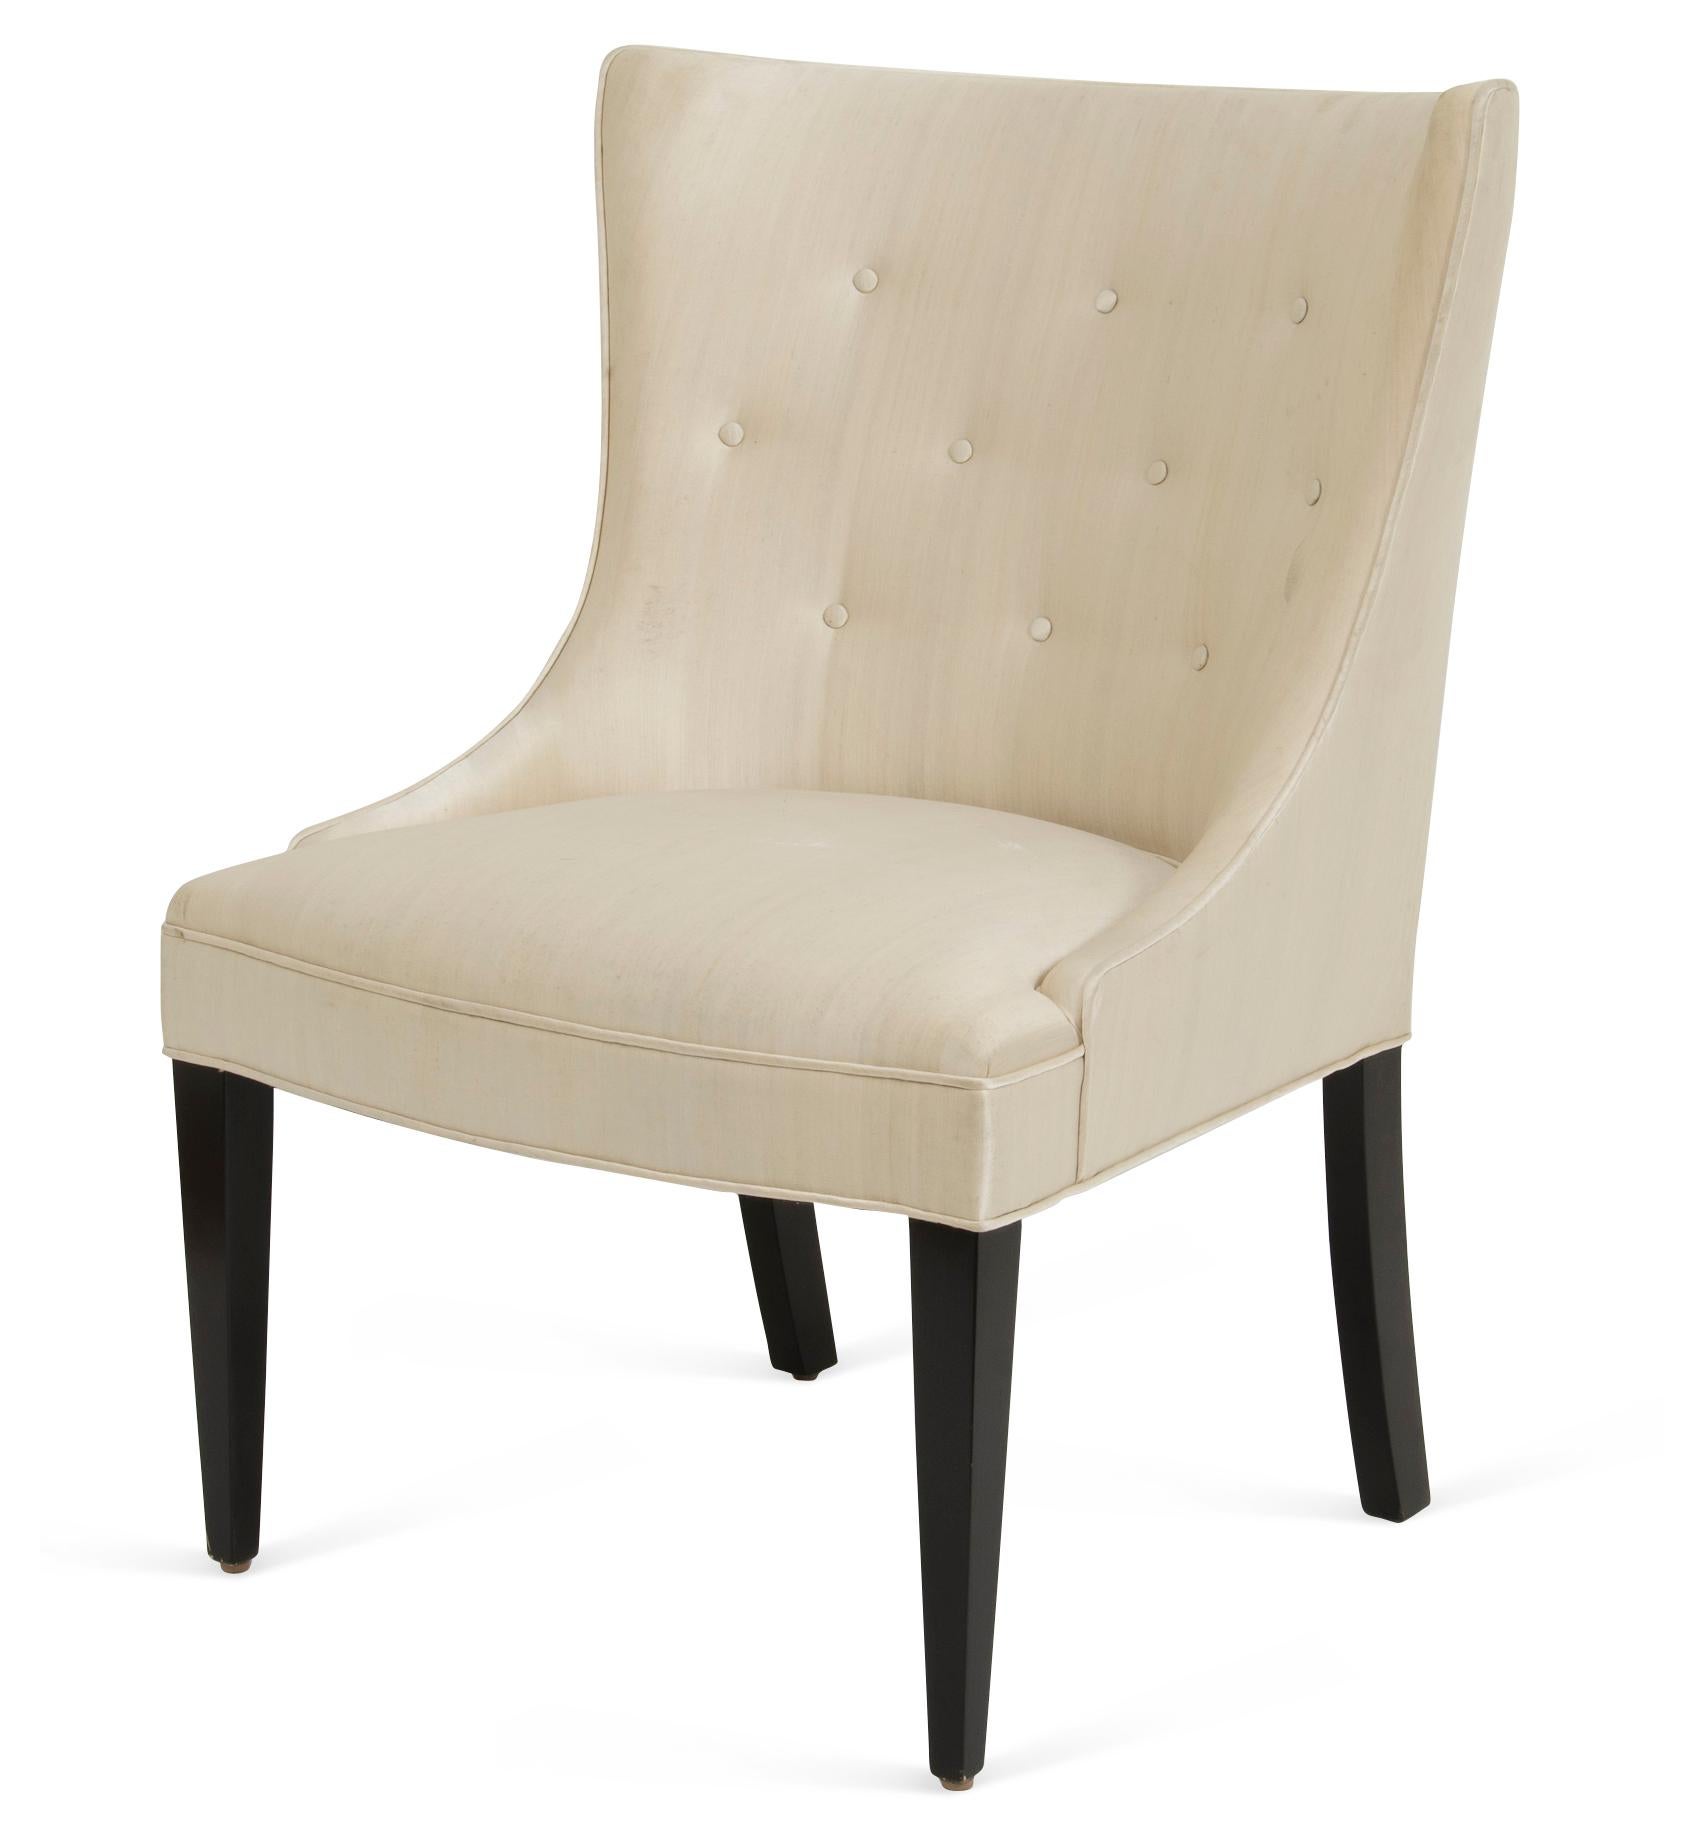 The upholstered 1940's style chair with a concave tufted back and tapered legs is hand-crafted, frame in alder wood. Custom sizes and finishes available.